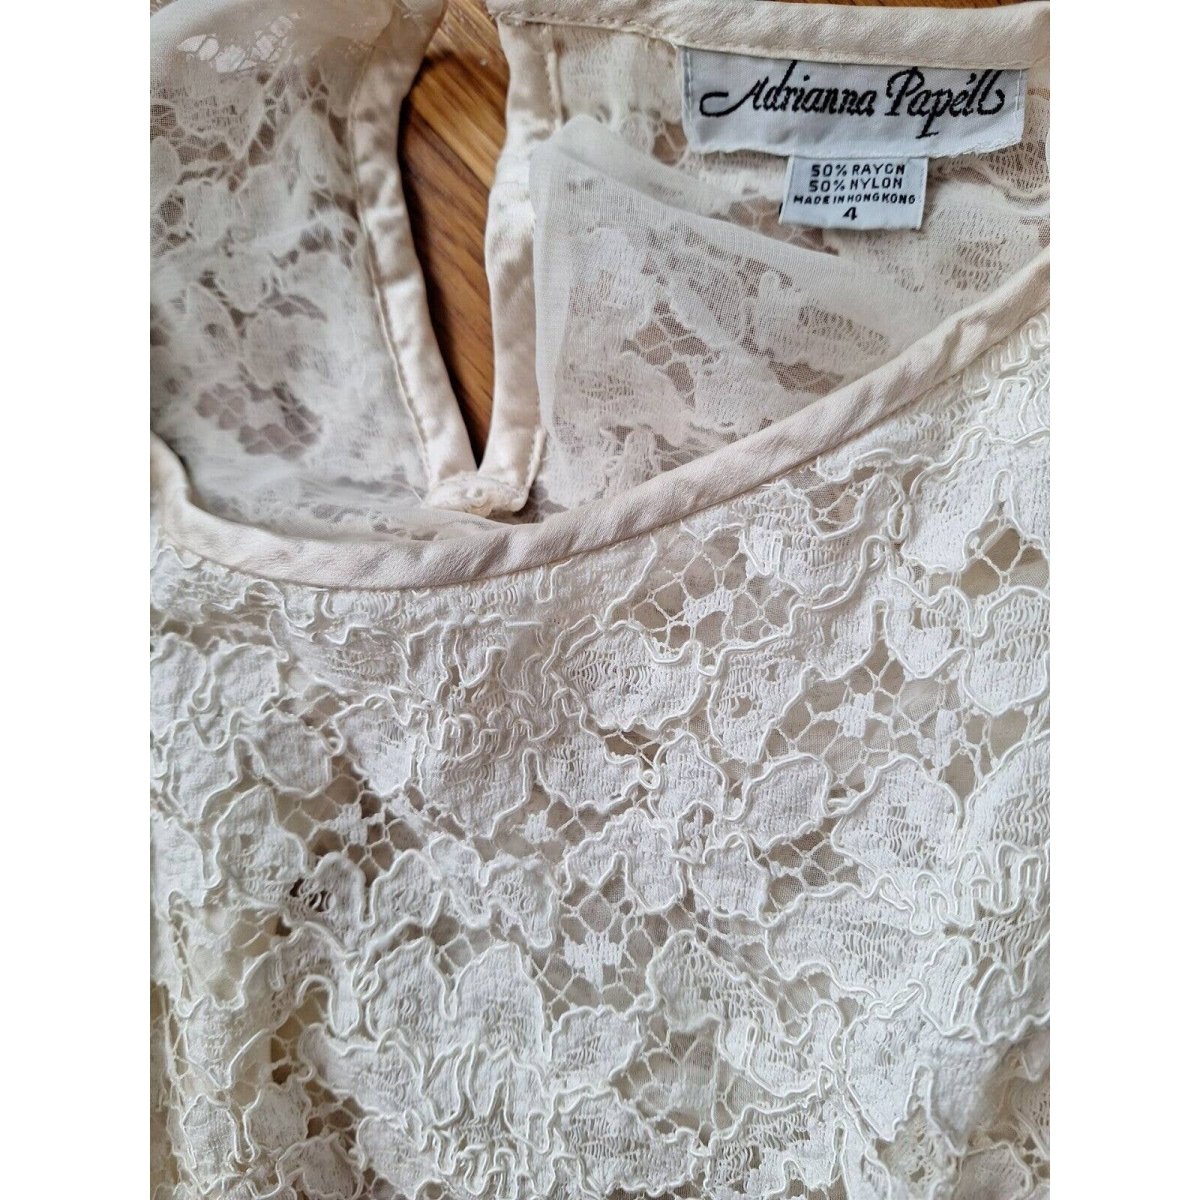 80s/90s Cream Sheer Lace Dolman Blouse Size 4 Small - themallvintage The Mall Vintage